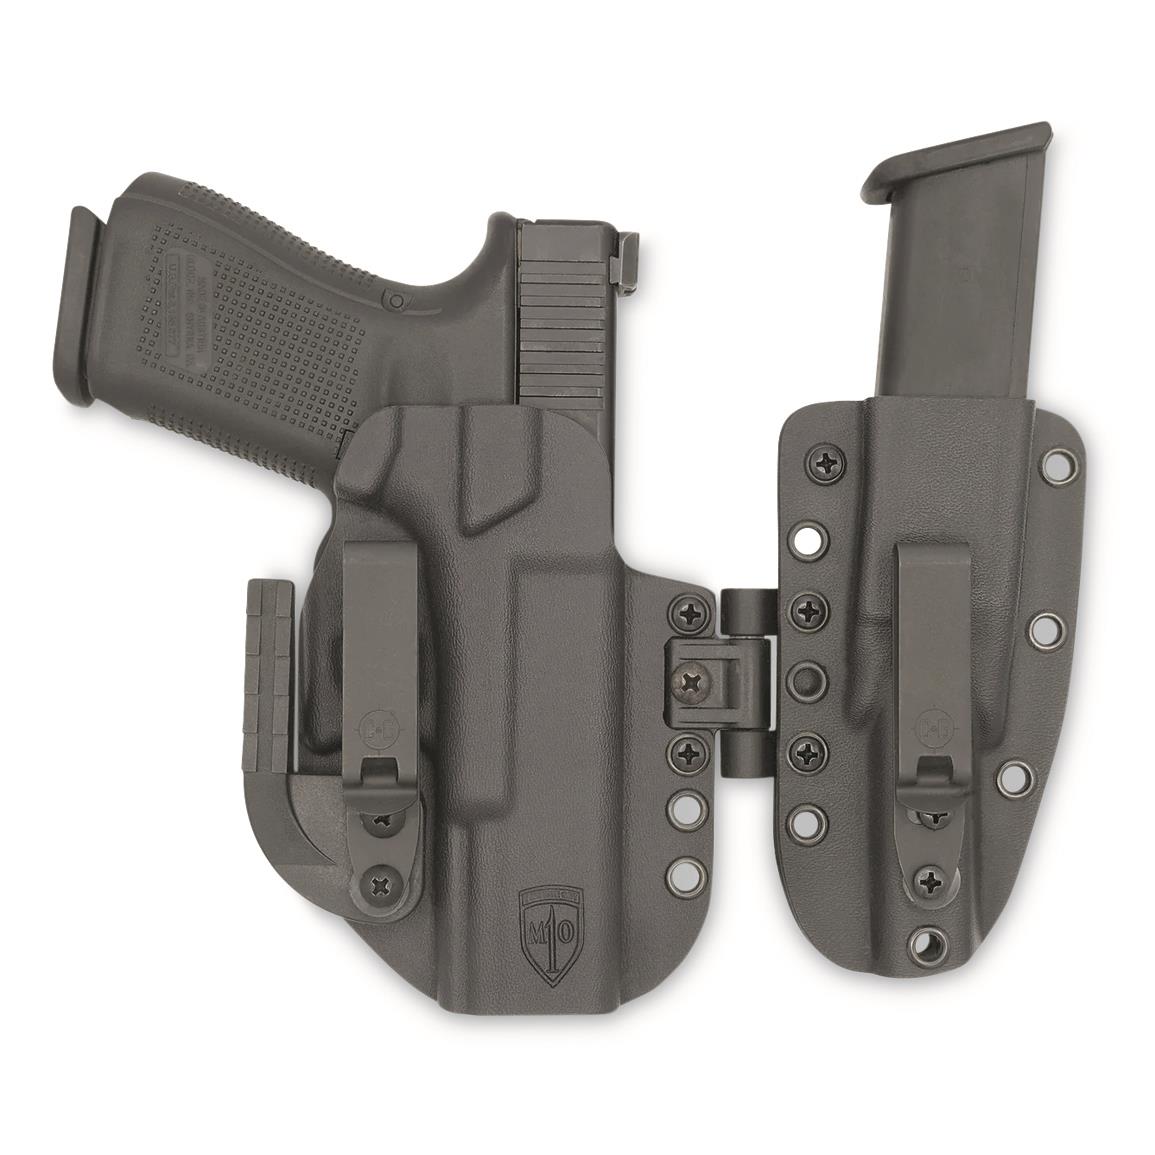 C&G Holsters MOD1-Lima IWB Kydex Holster System, SIG SAUER P365XL